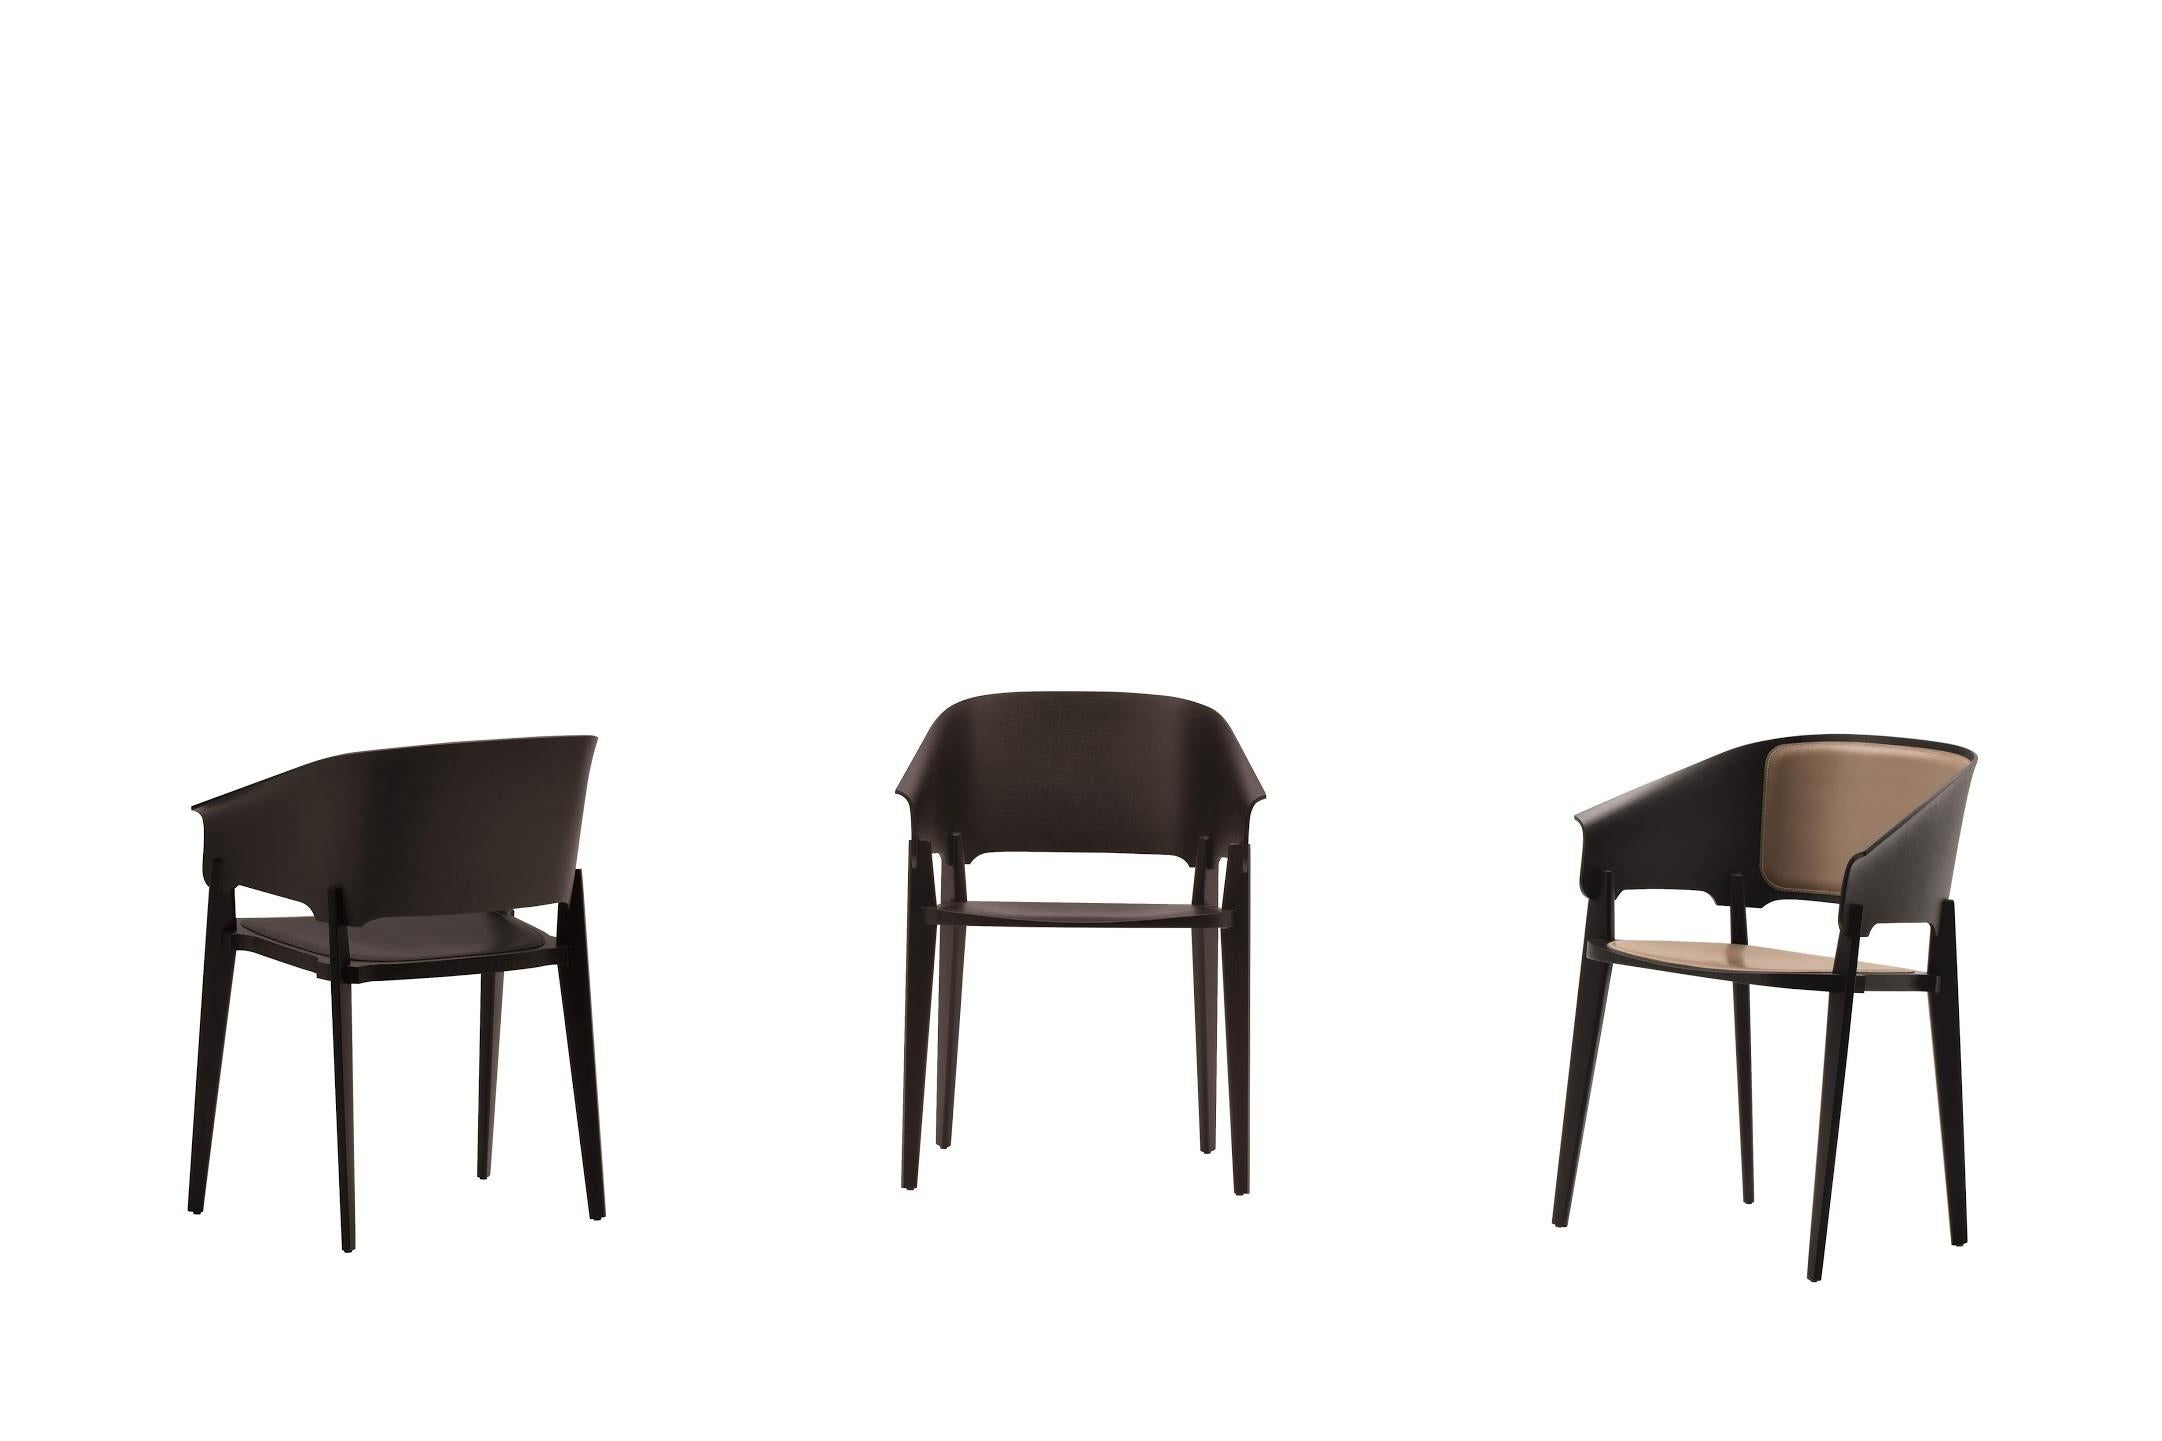 Three-piece, designed by Claesson Koivisto Rune in collaboration with Rasmus Palmgren, is a chair made entirely of wood, which combines elements in solid wood (geometric legs and shaped seat) with elements in plywood (the curved backrest). The